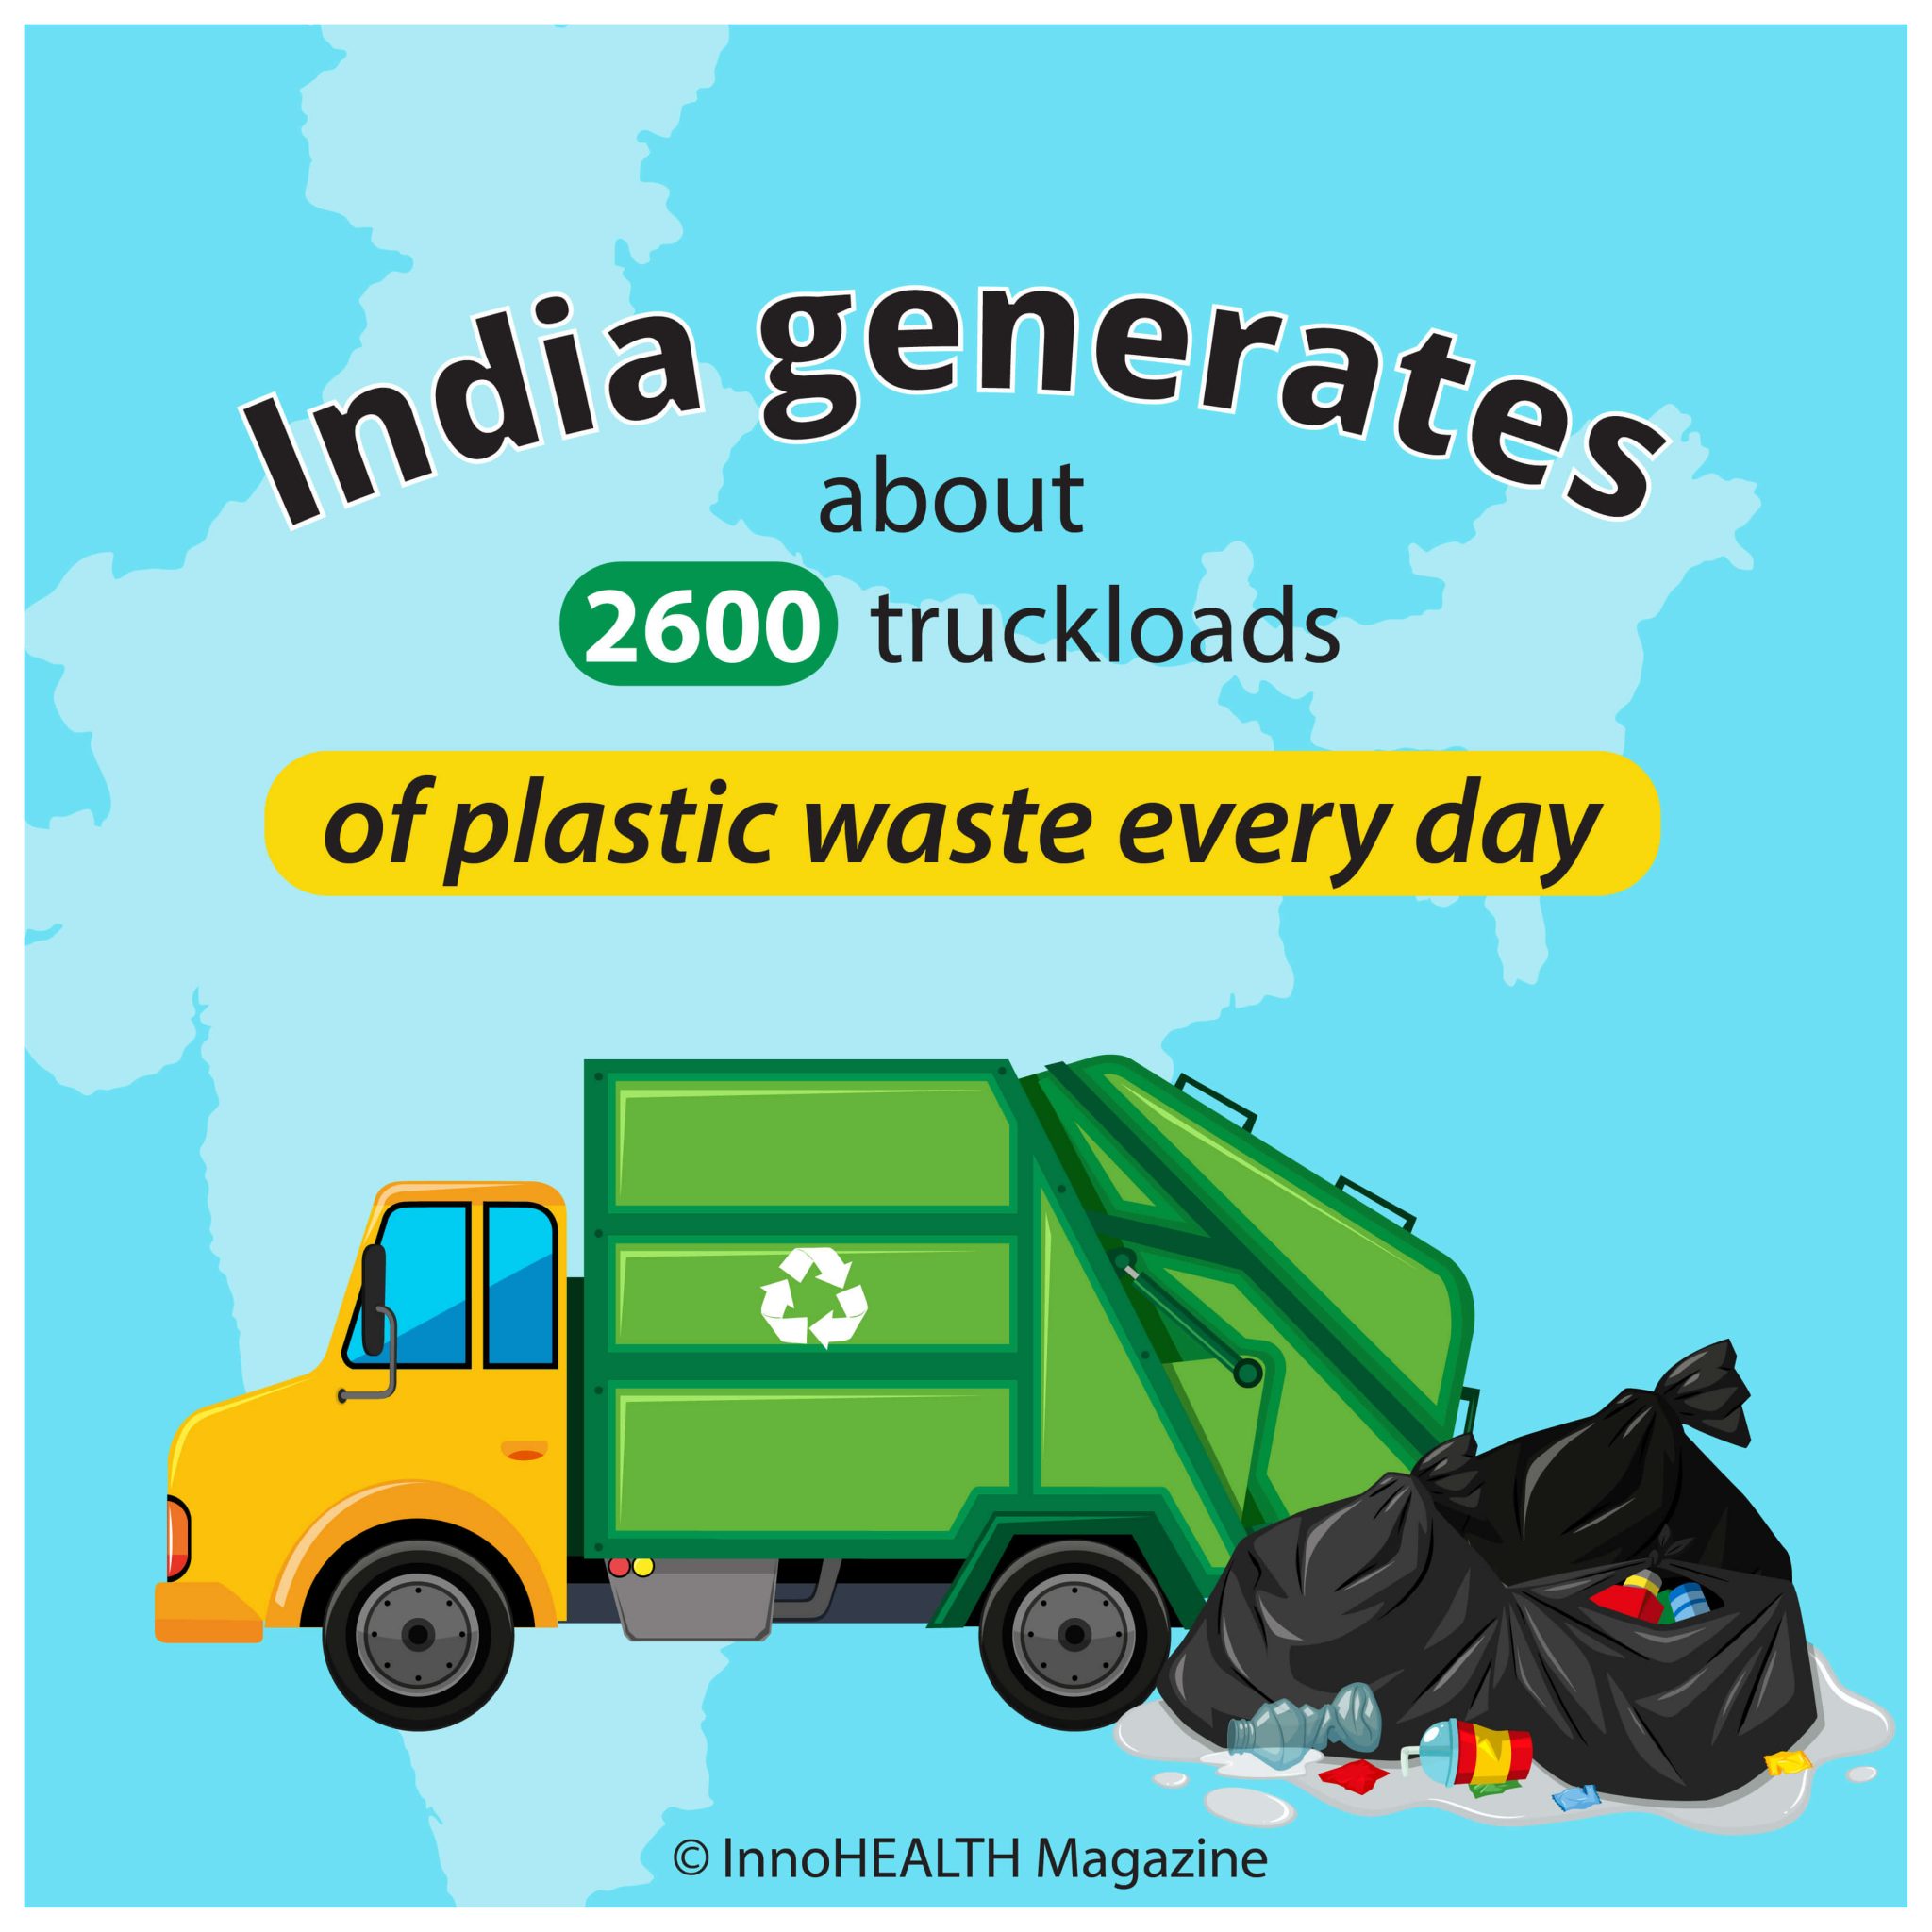 India generates 2600 truckloads of waste every year